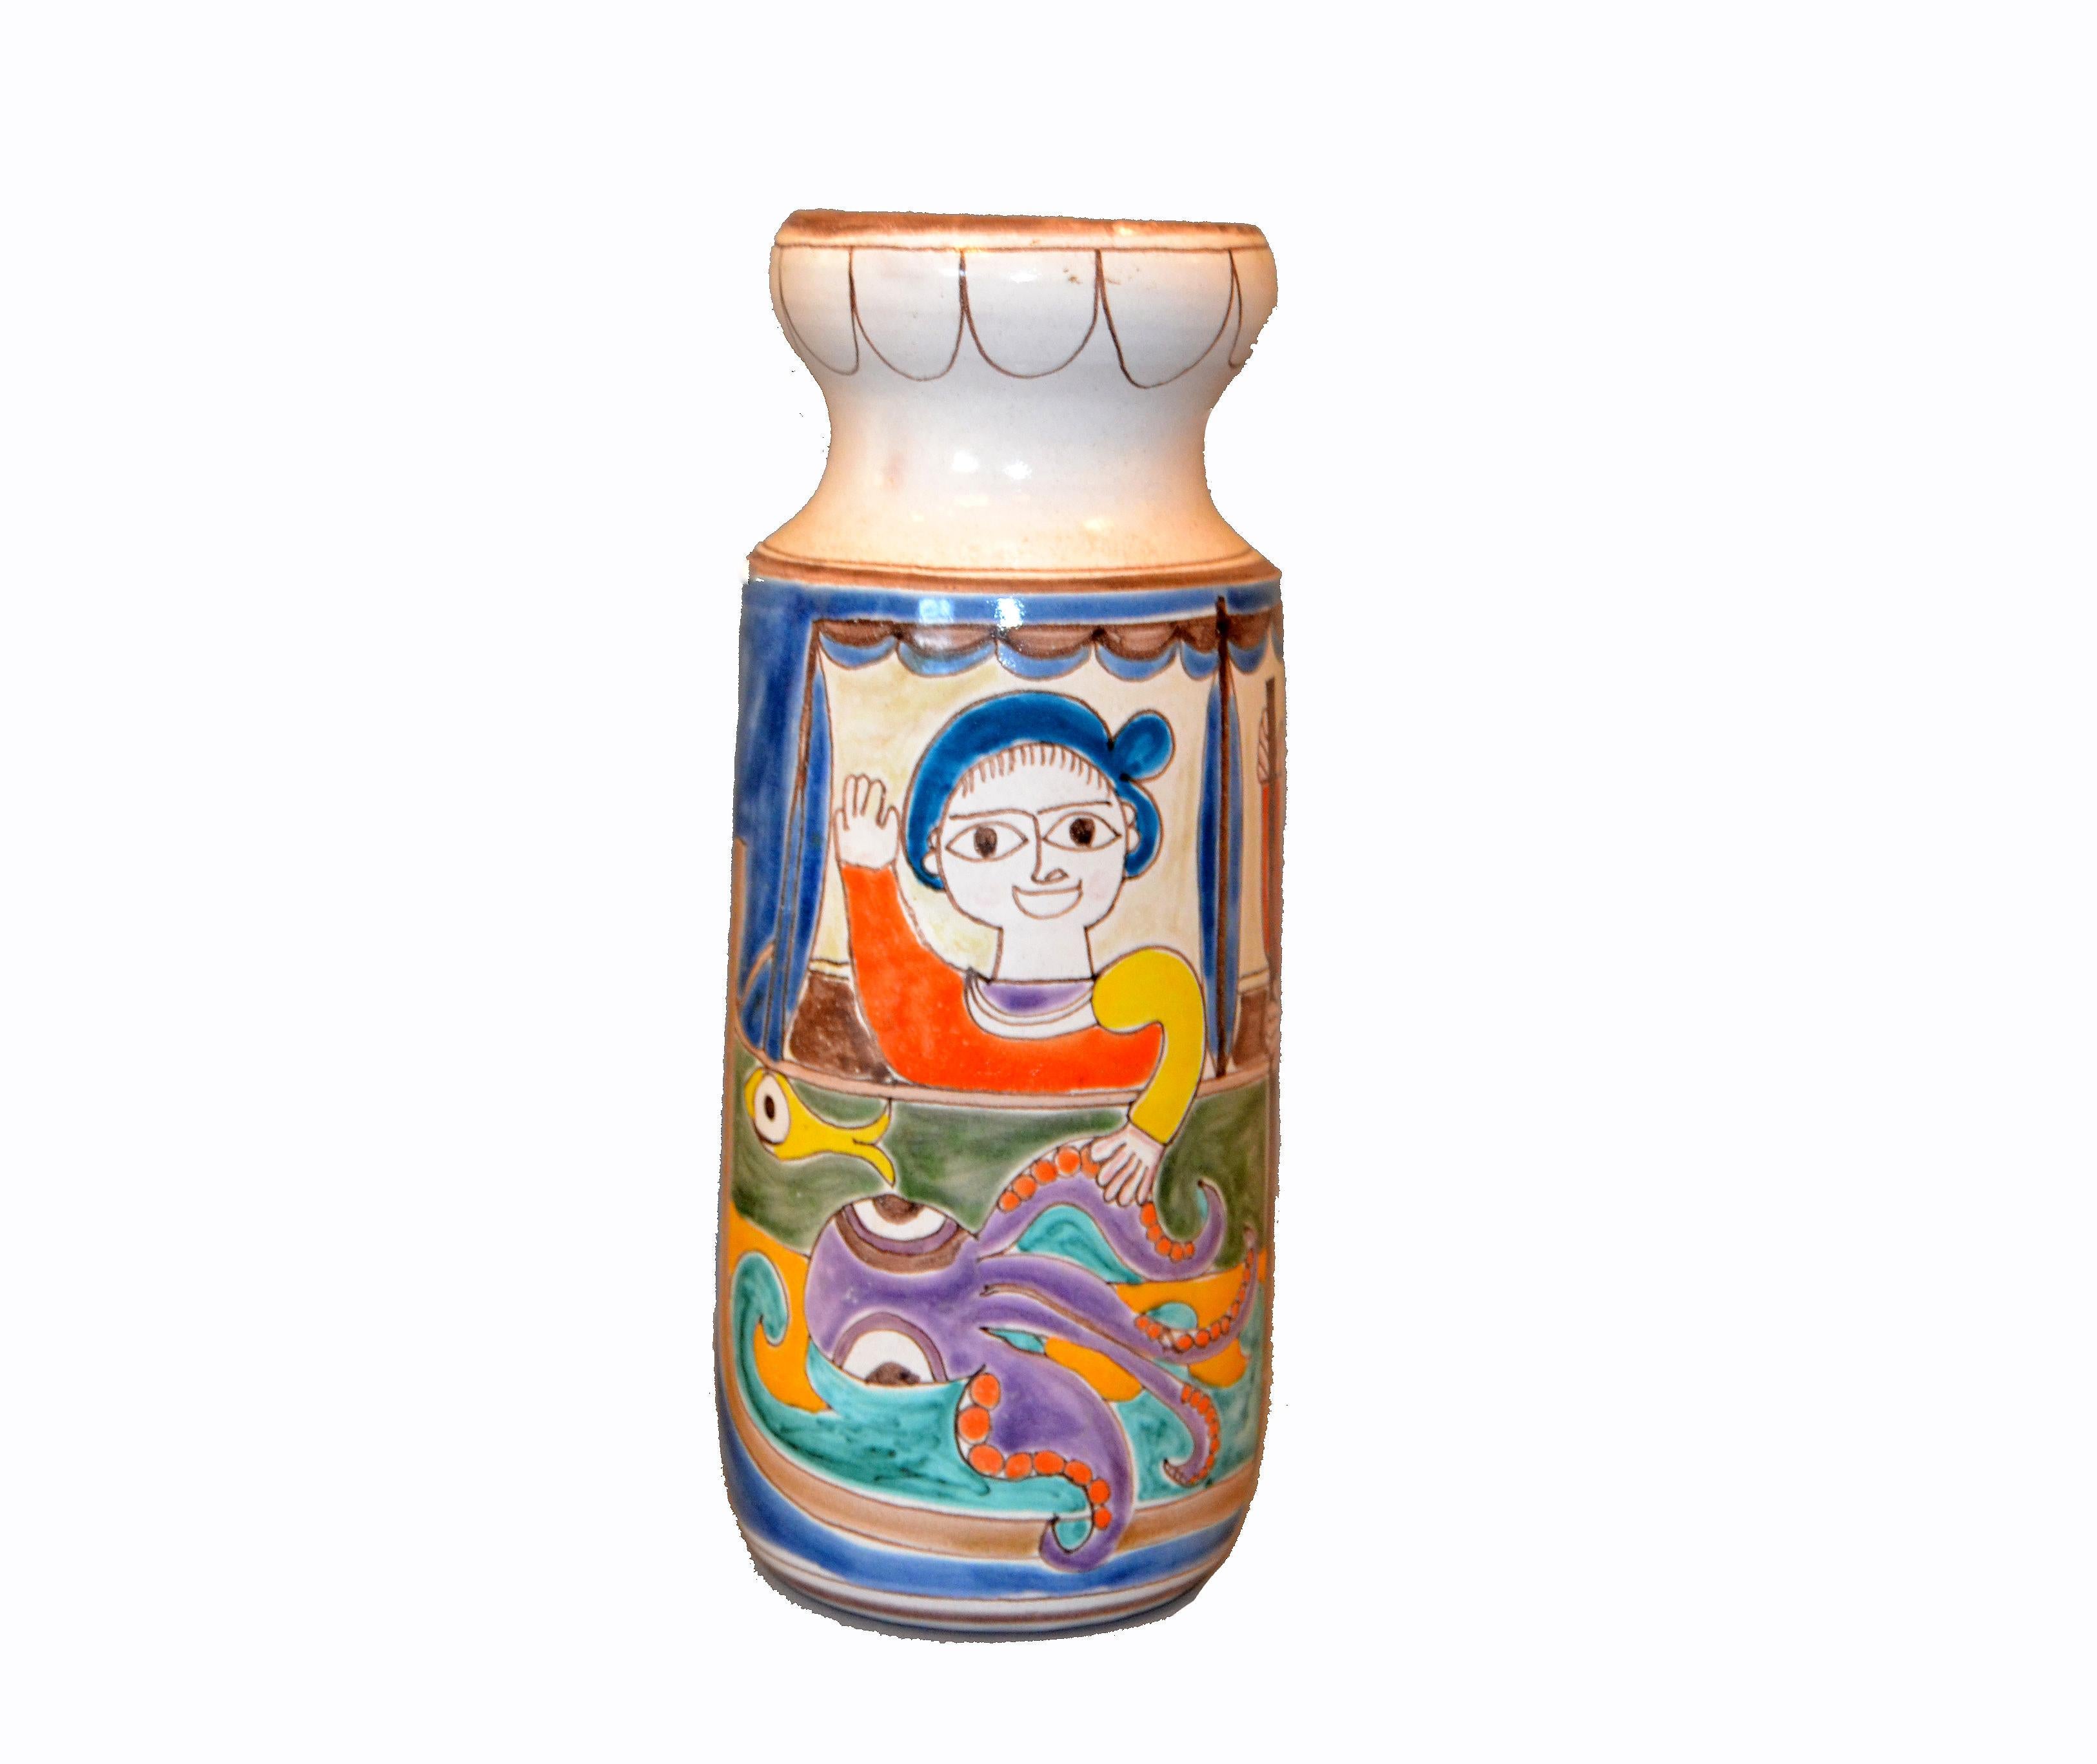 Original Italian Giovanni Desimone hand painted tall art pottery flower vase, vessel.
The glazed vase painting depicts two fishermen in action catching fish and octopus.
Marked and numbered on underside, 'Desimone, Italy / 13'.
THIS ITEM WILL BE